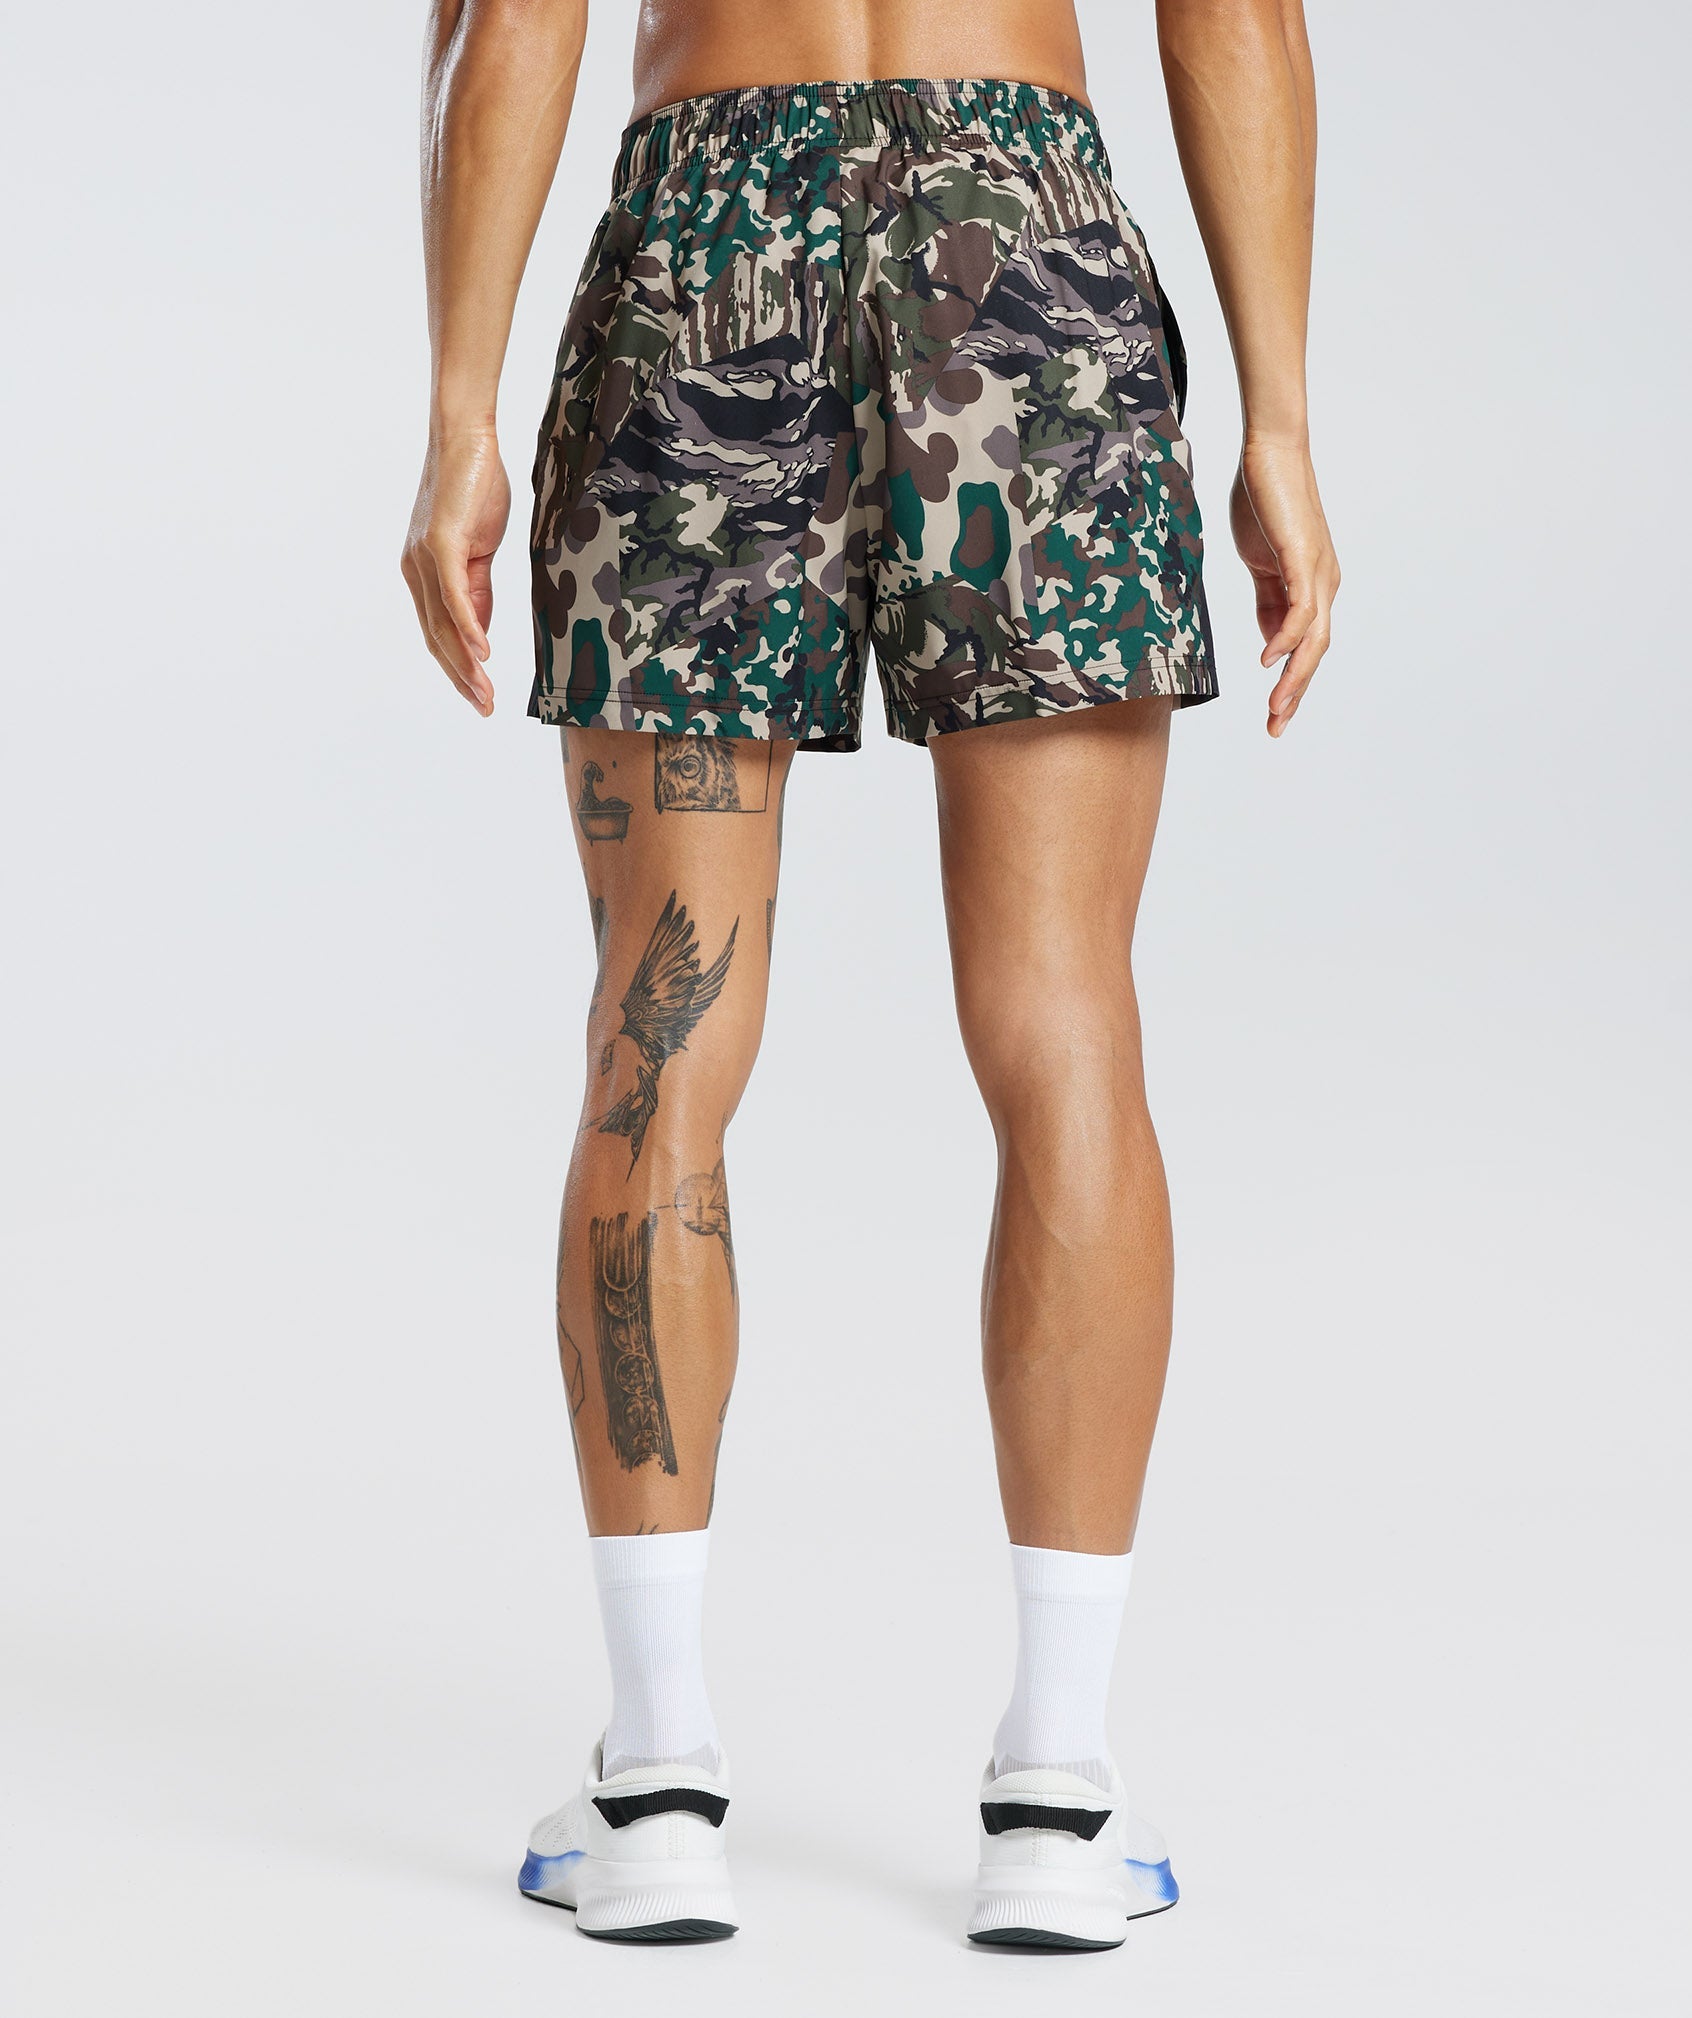 Sport 5" Shorts in Cement Brown/Black Print - view 2